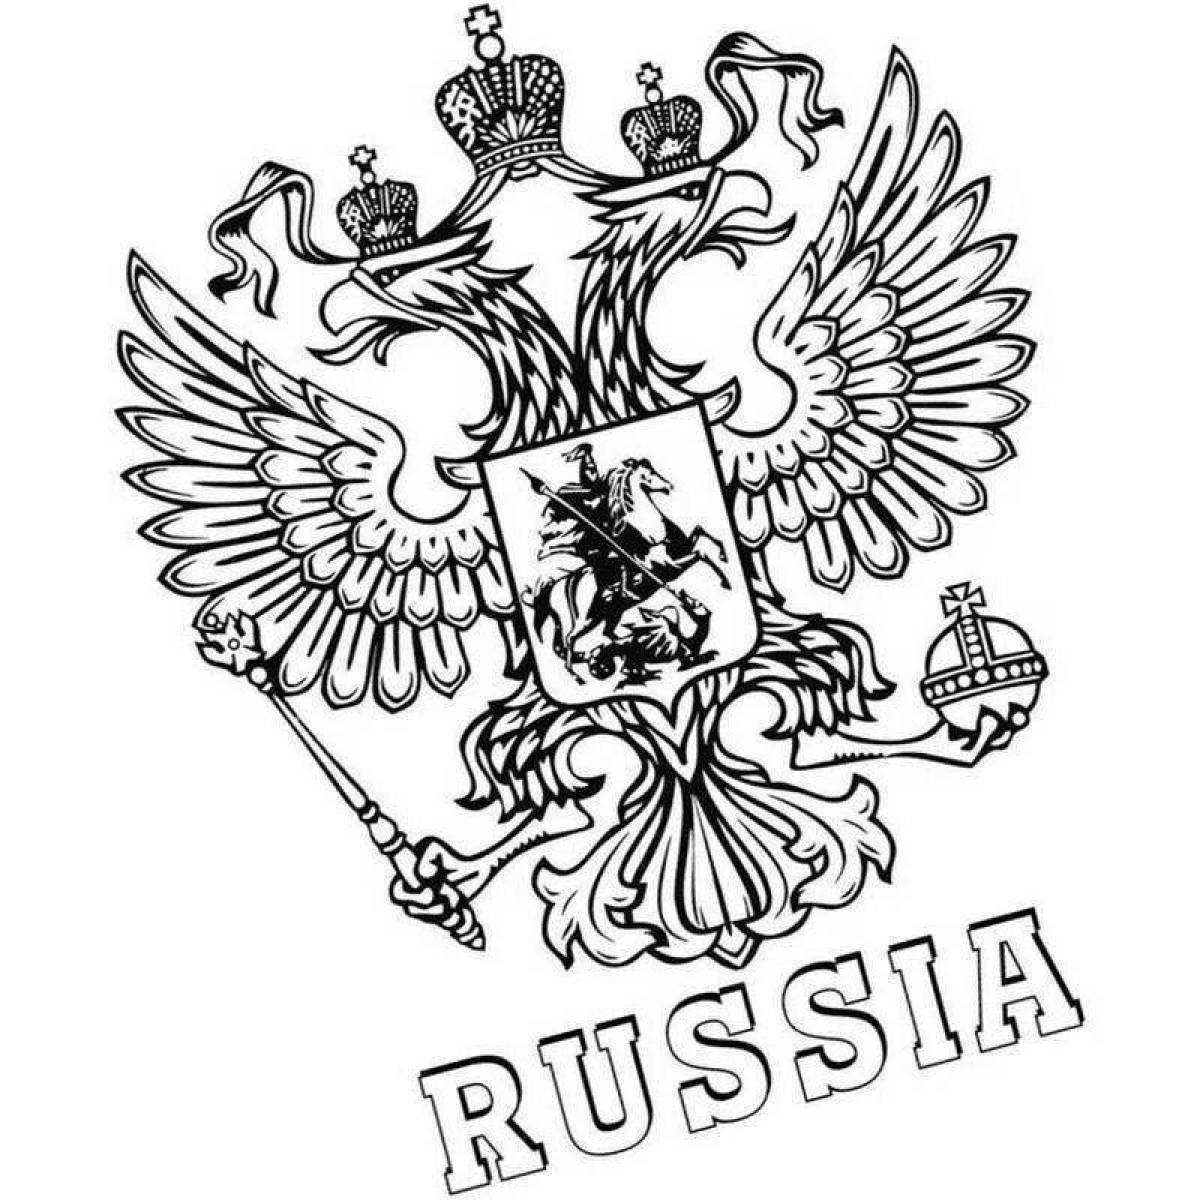 Exquisite flag and coat of arms of russia